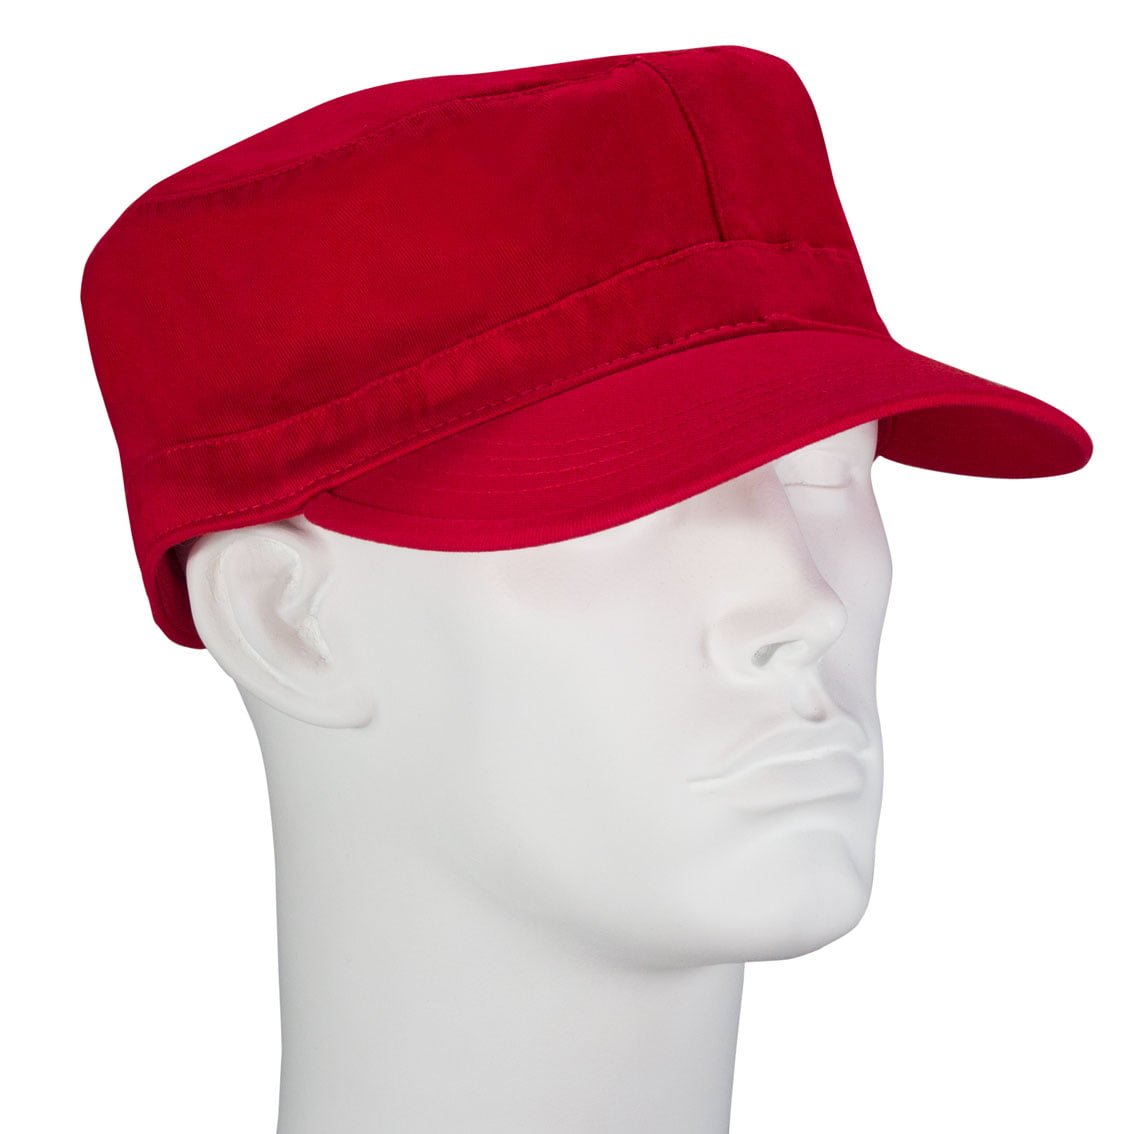 12pcs Red Plain Castro Military Fatigue Army Hats - Fitted - Unconstructed - 100% Cotton - Bulk by the Dozen - Wholesale